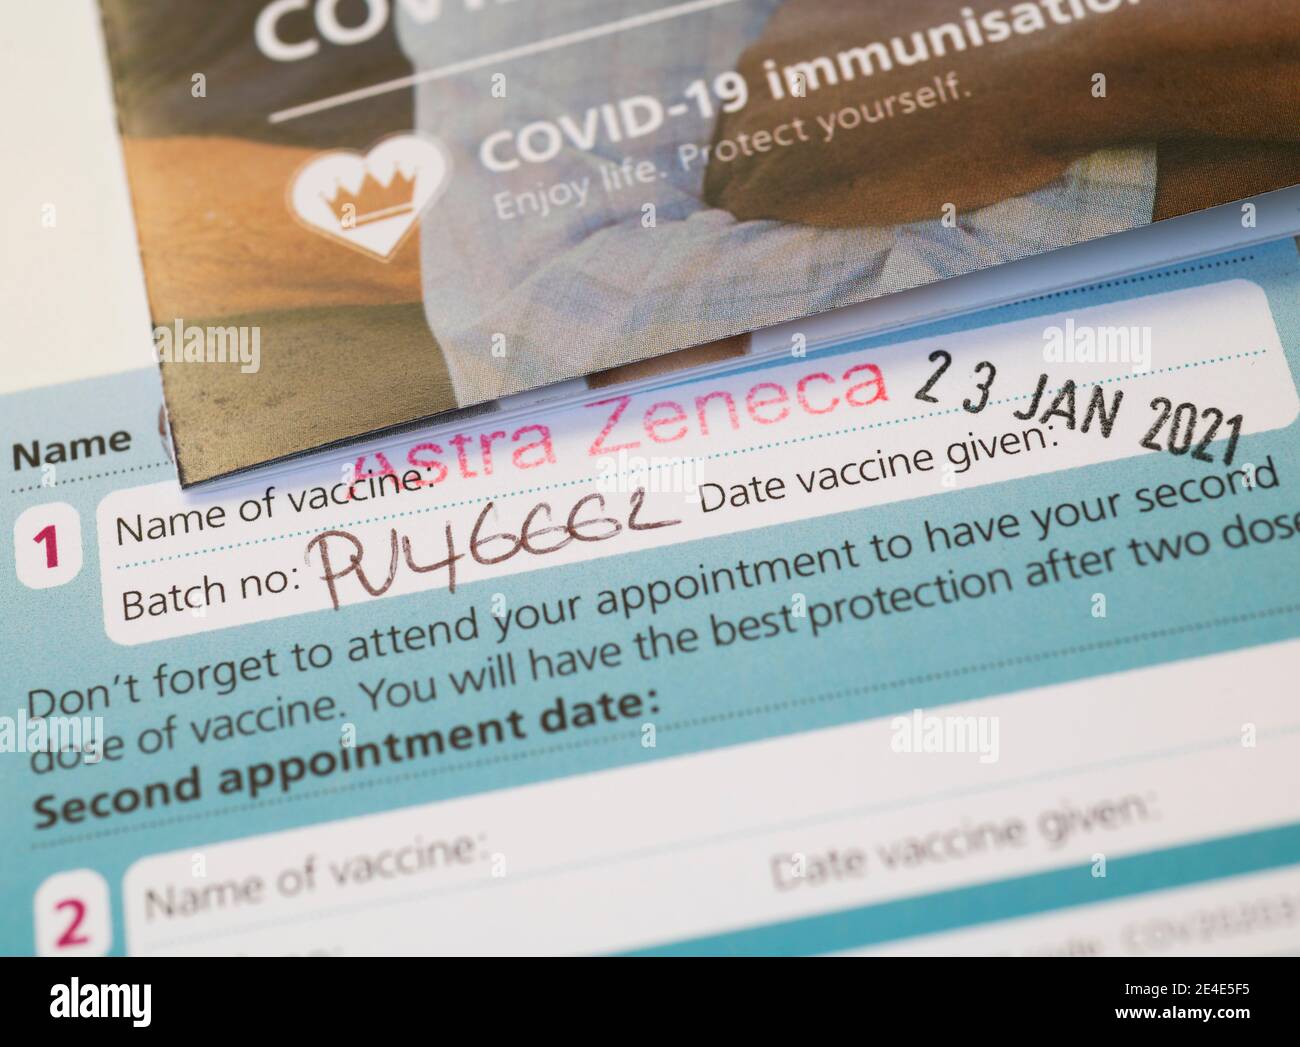 London, UK. 23 January 2021. A Covid-19 vaccination card showing first AstraZeneca vaccine given. The Oxford/AstraZeneca has not yet been approved by the EU. Credit: Malcolm Park/Alamy Live News. Stock Photo